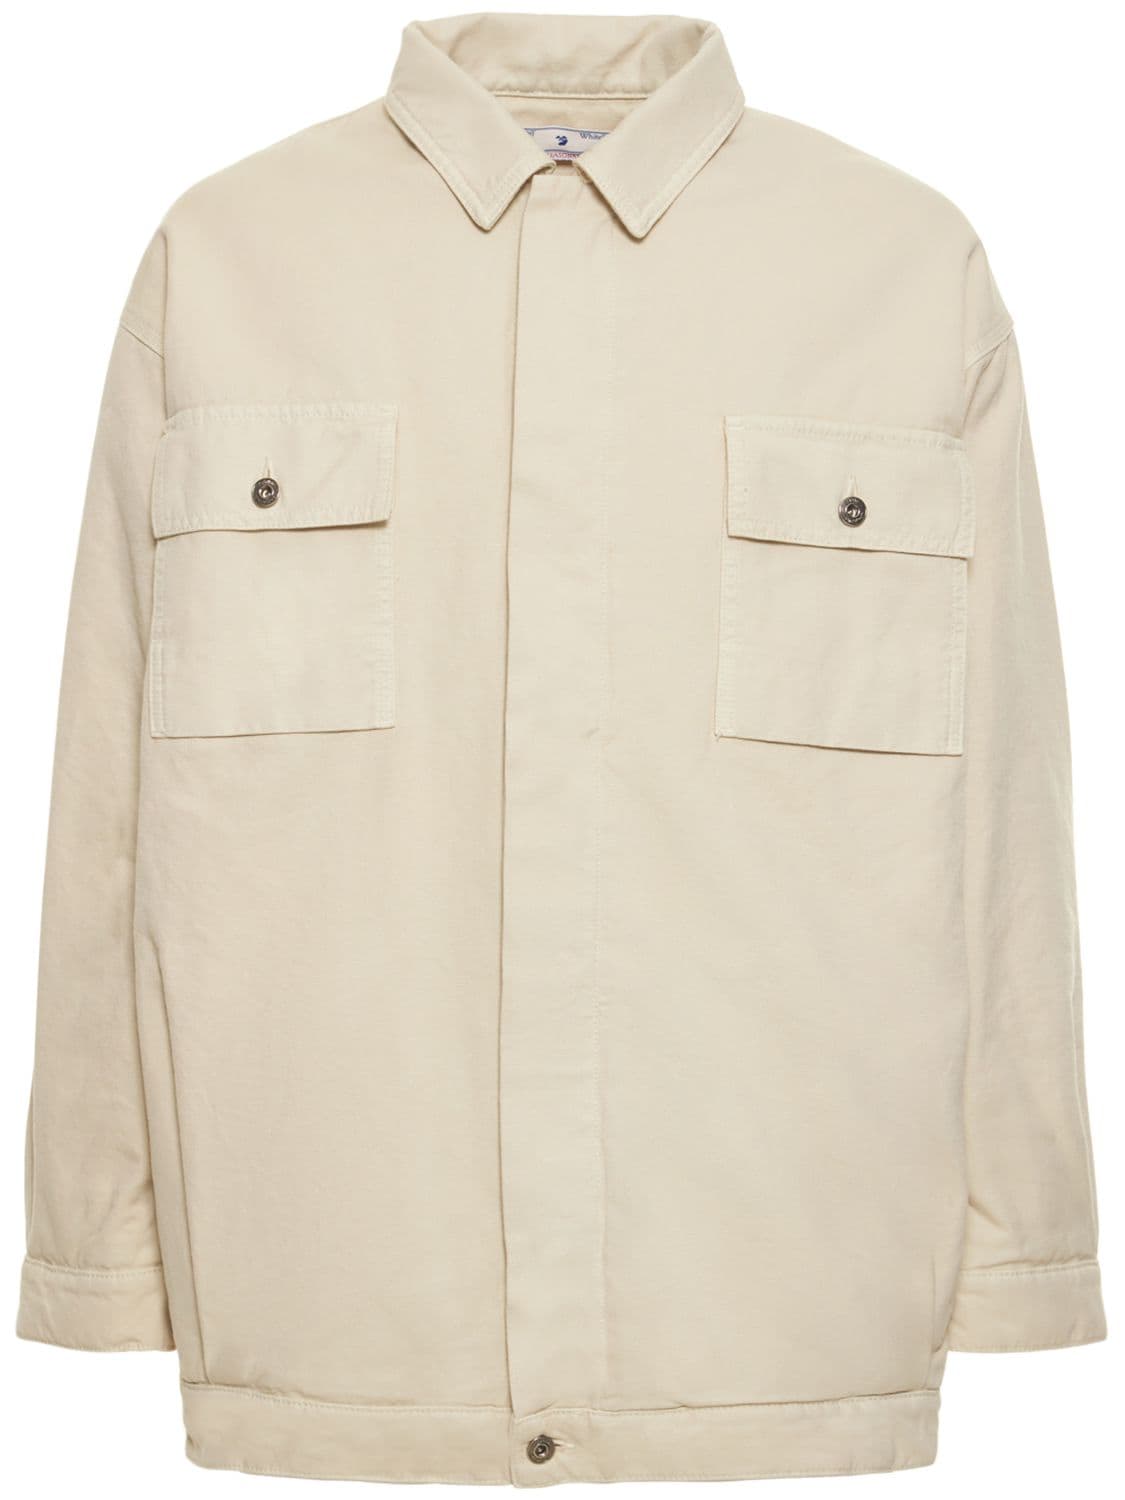 OFF-WHITE Cotton Canvas Military Over Shirt